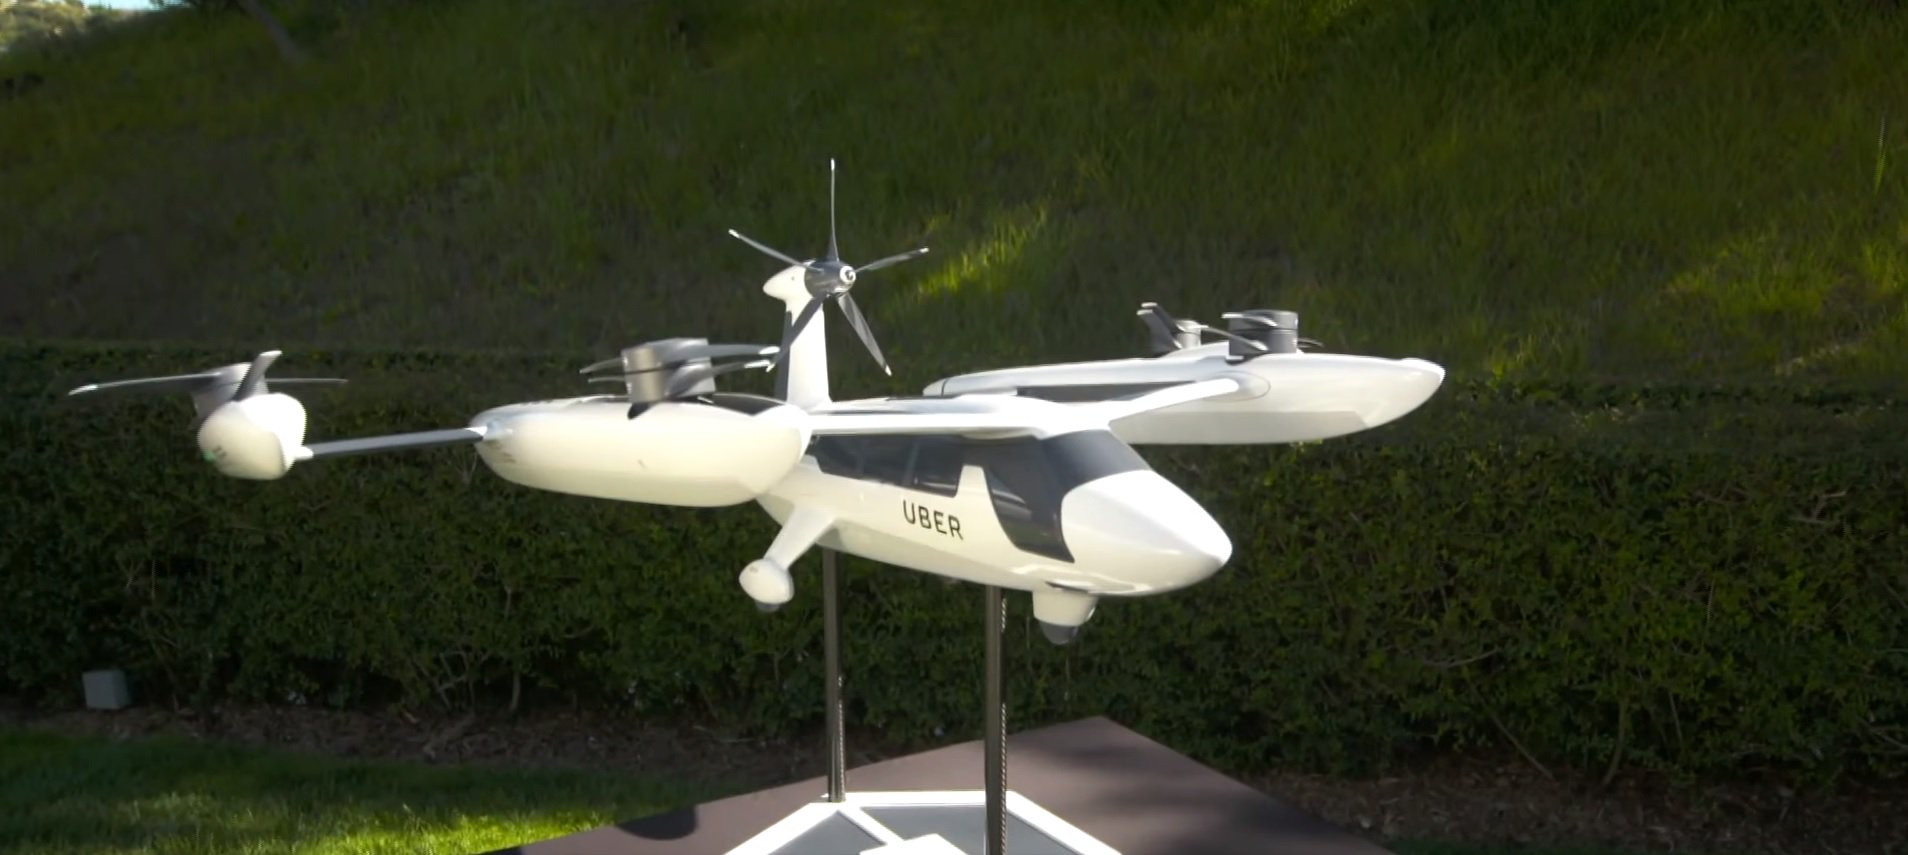 Uber first showed the prototype of his flying taxi